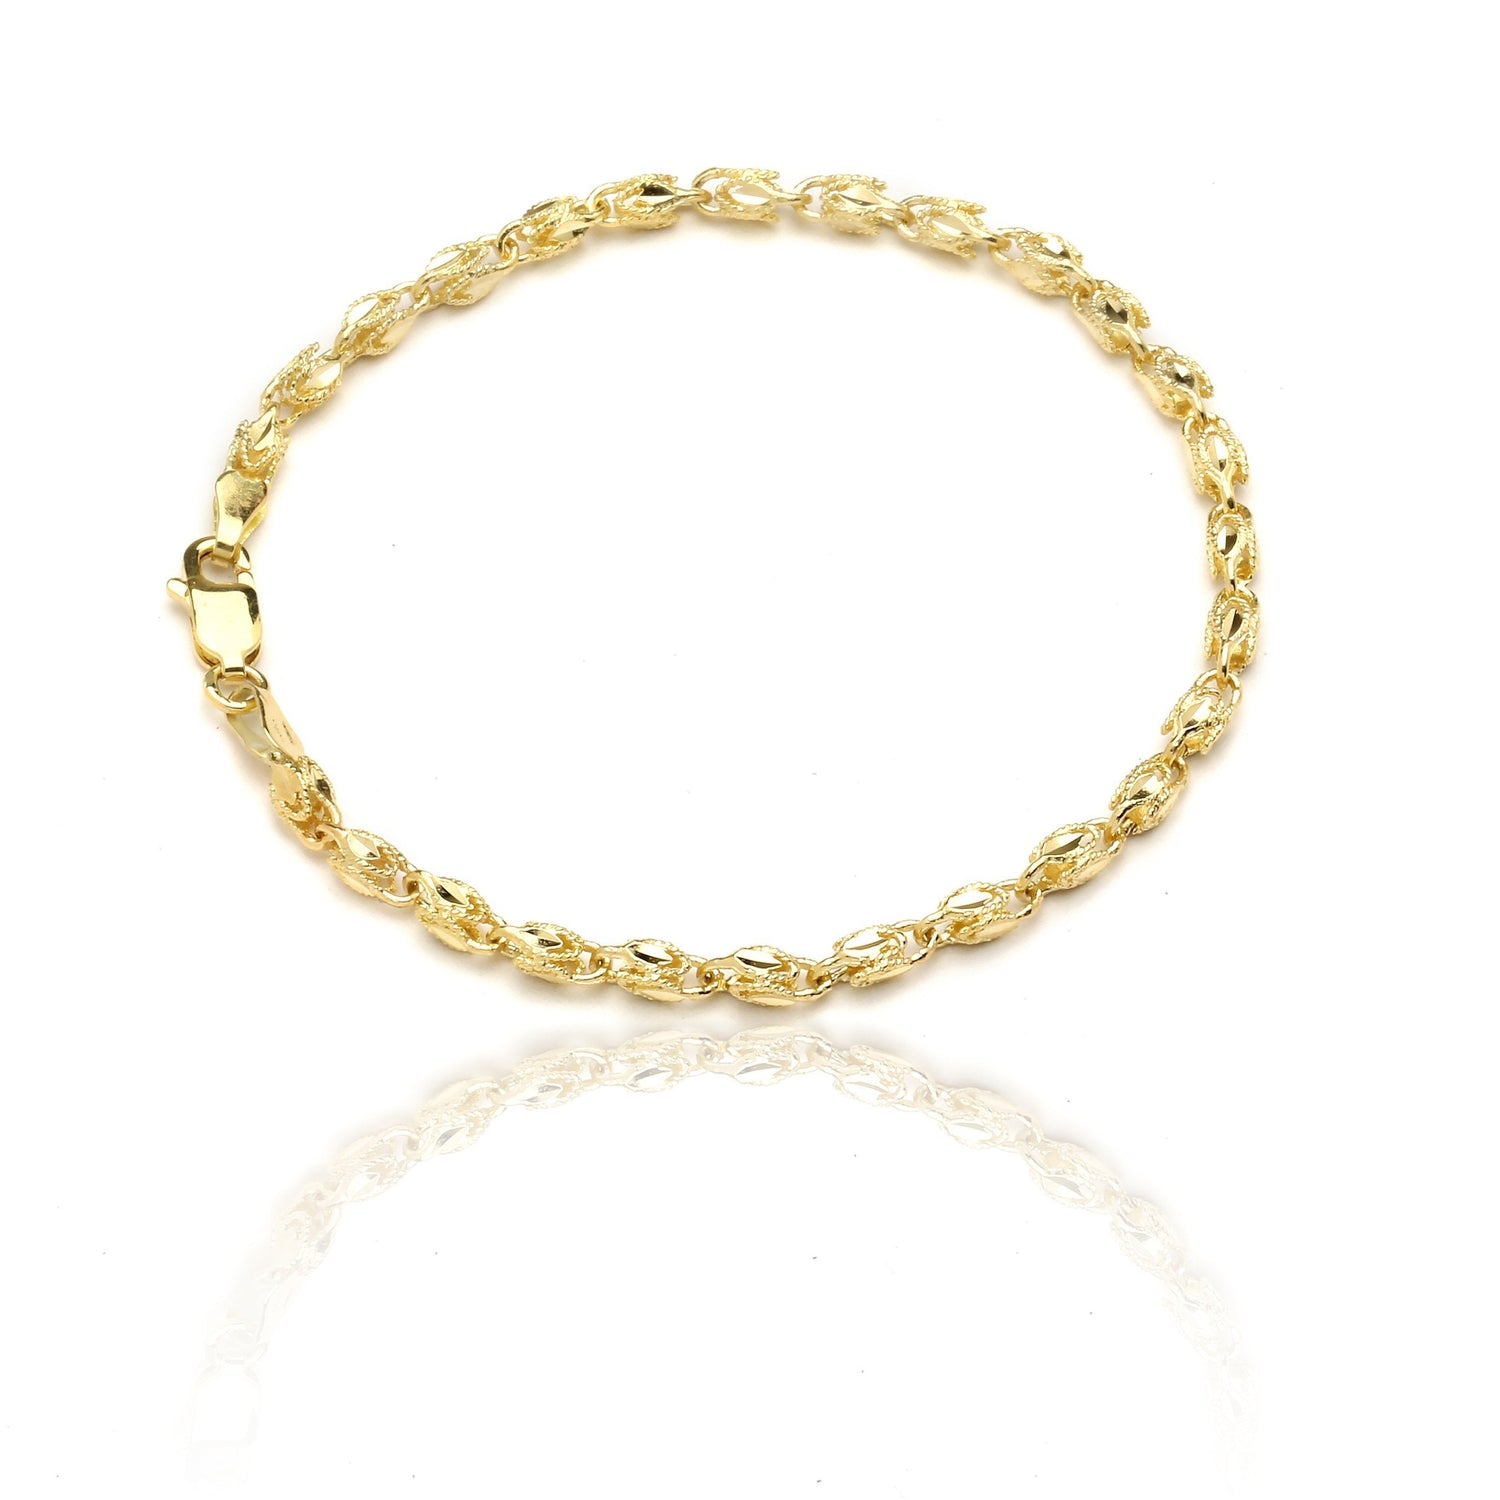 10k Yellow Gold Turkish Rope Chain Bracelet and Anklet for Women and Men, 3.5mm